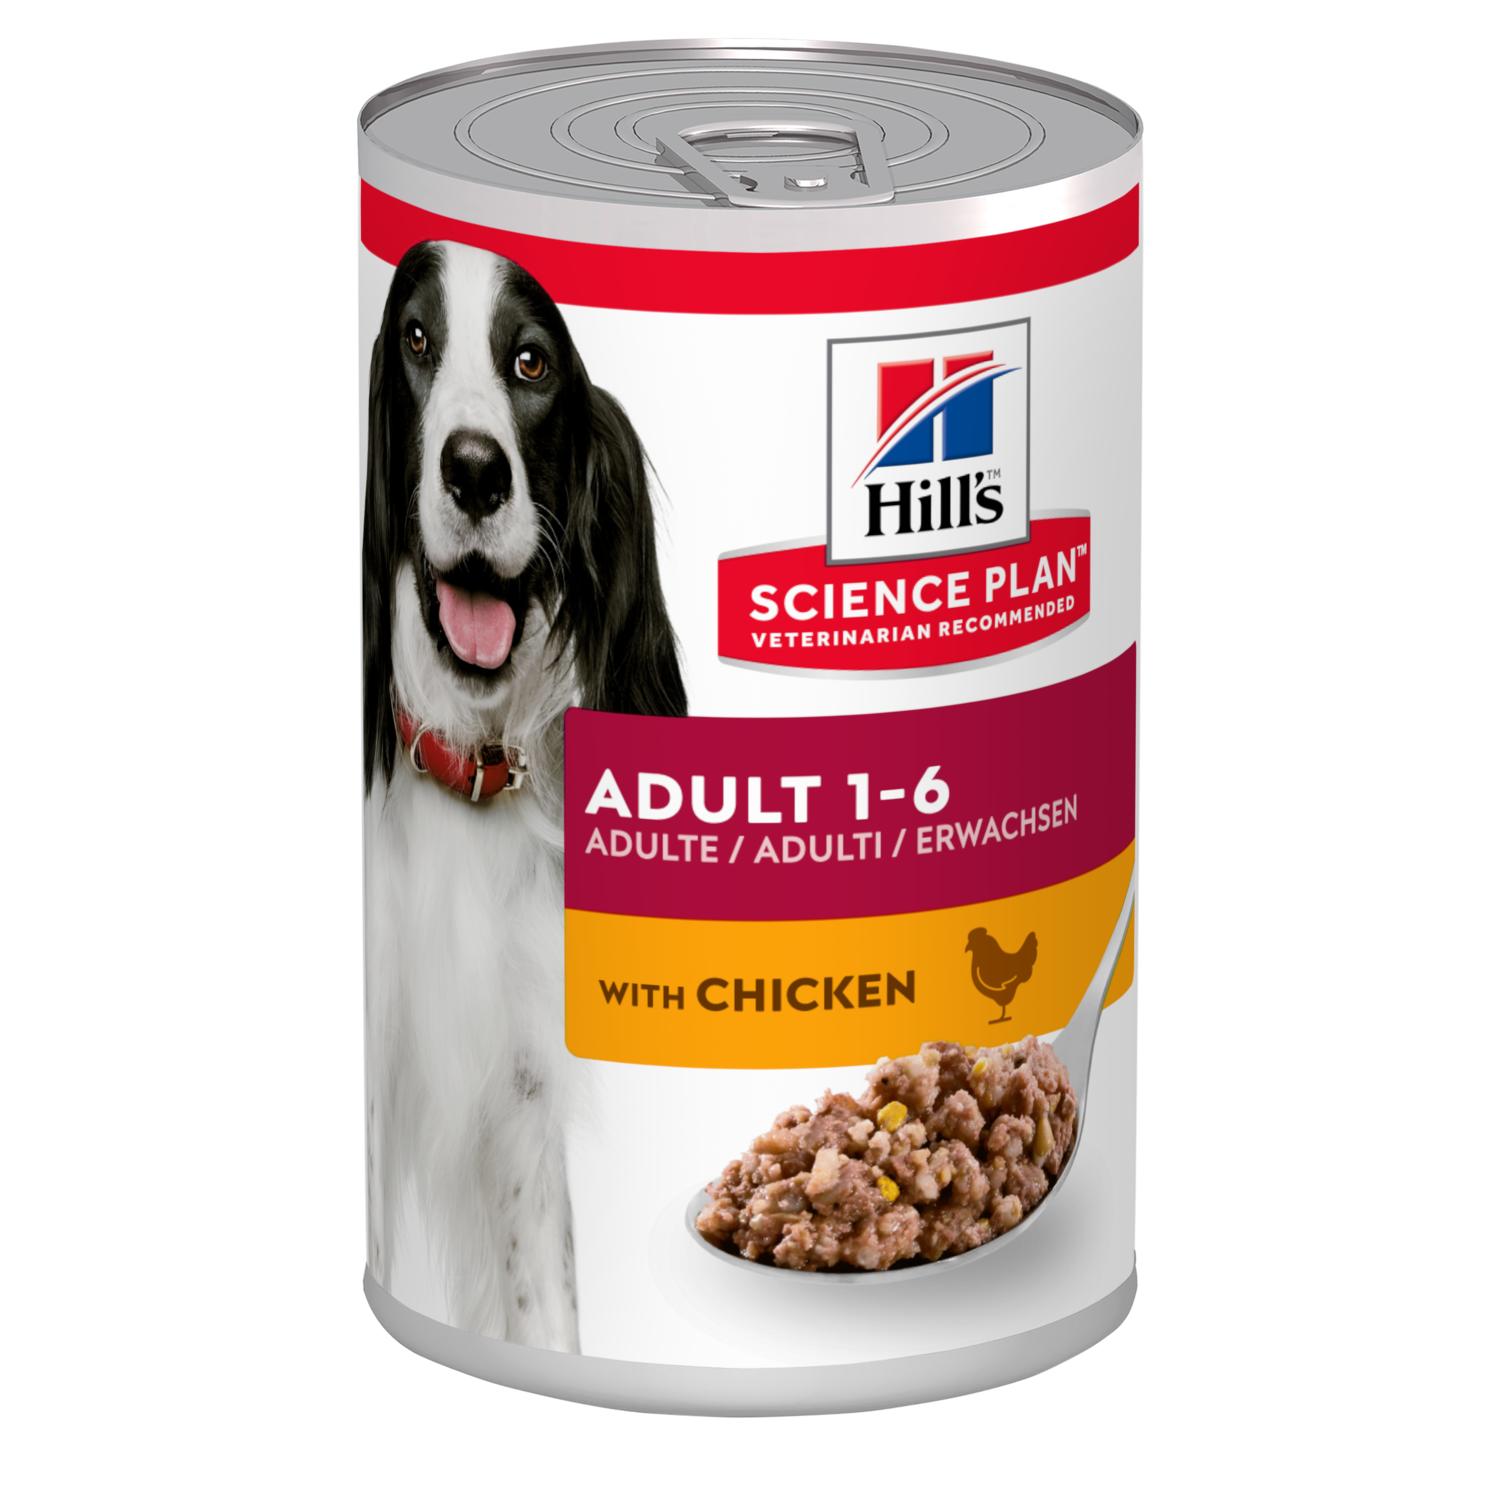 Hill's Science Plan Adult Chicken